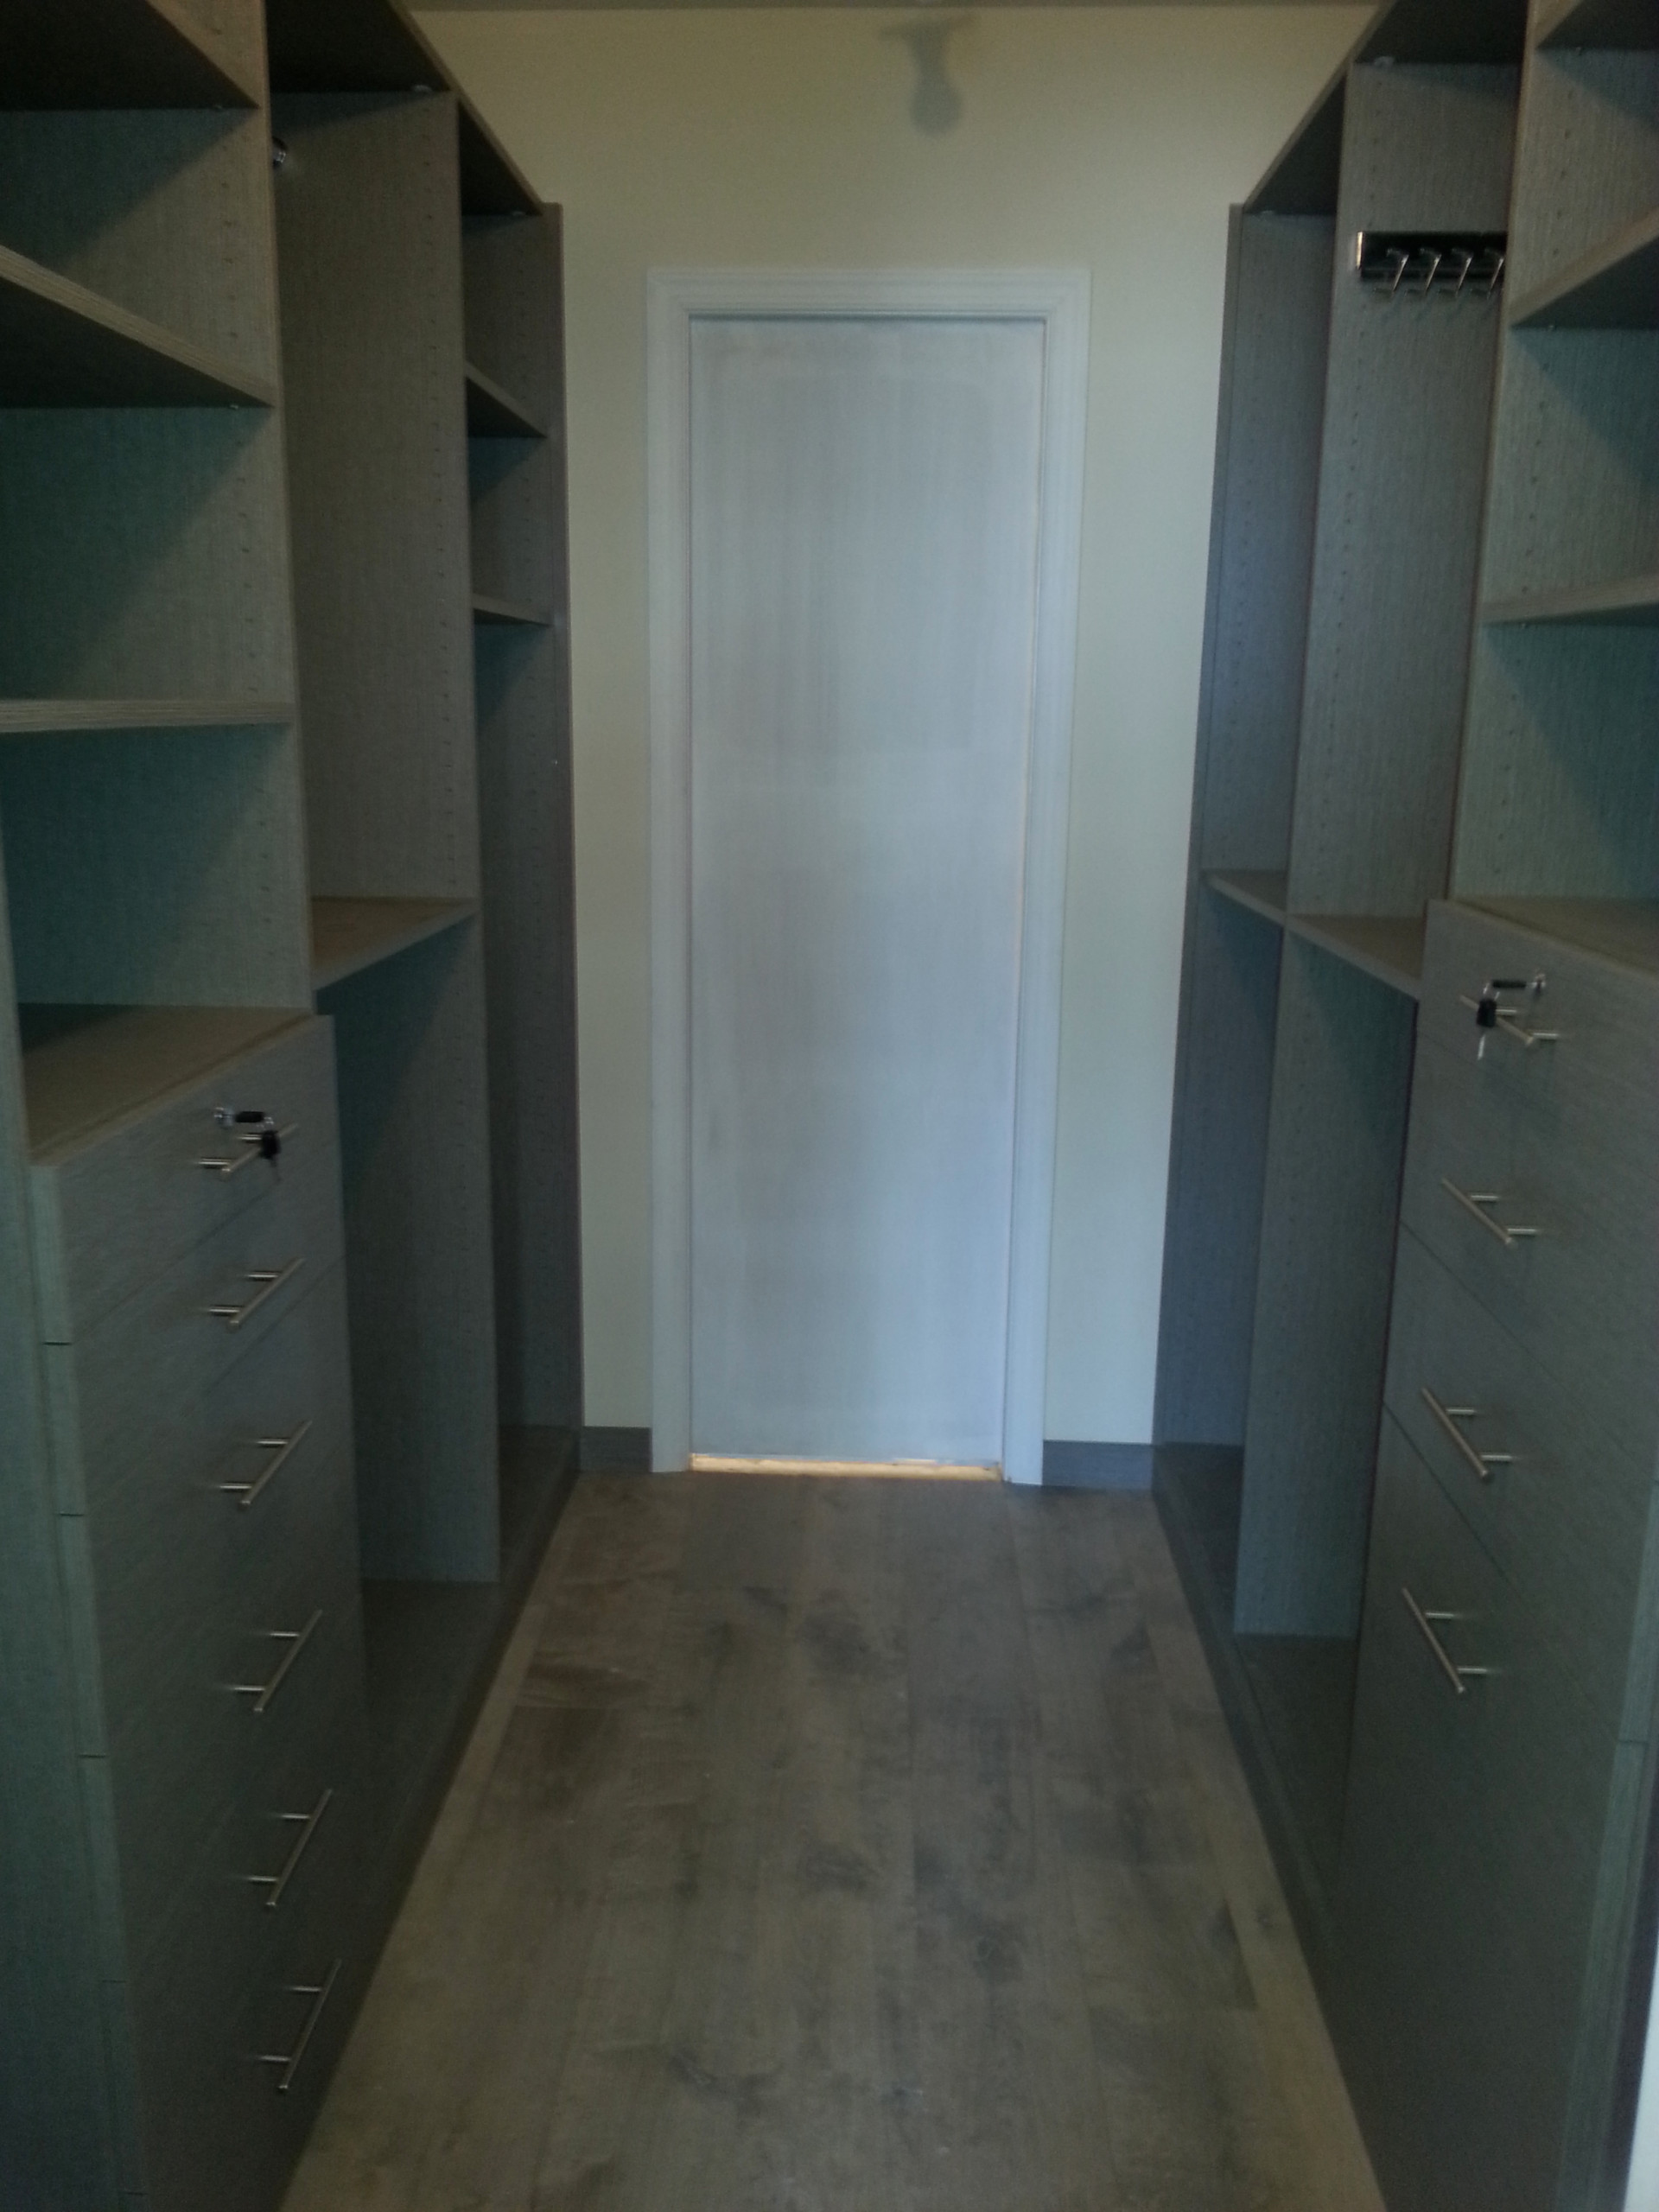 Dressing Rooms/Walk-In Closets